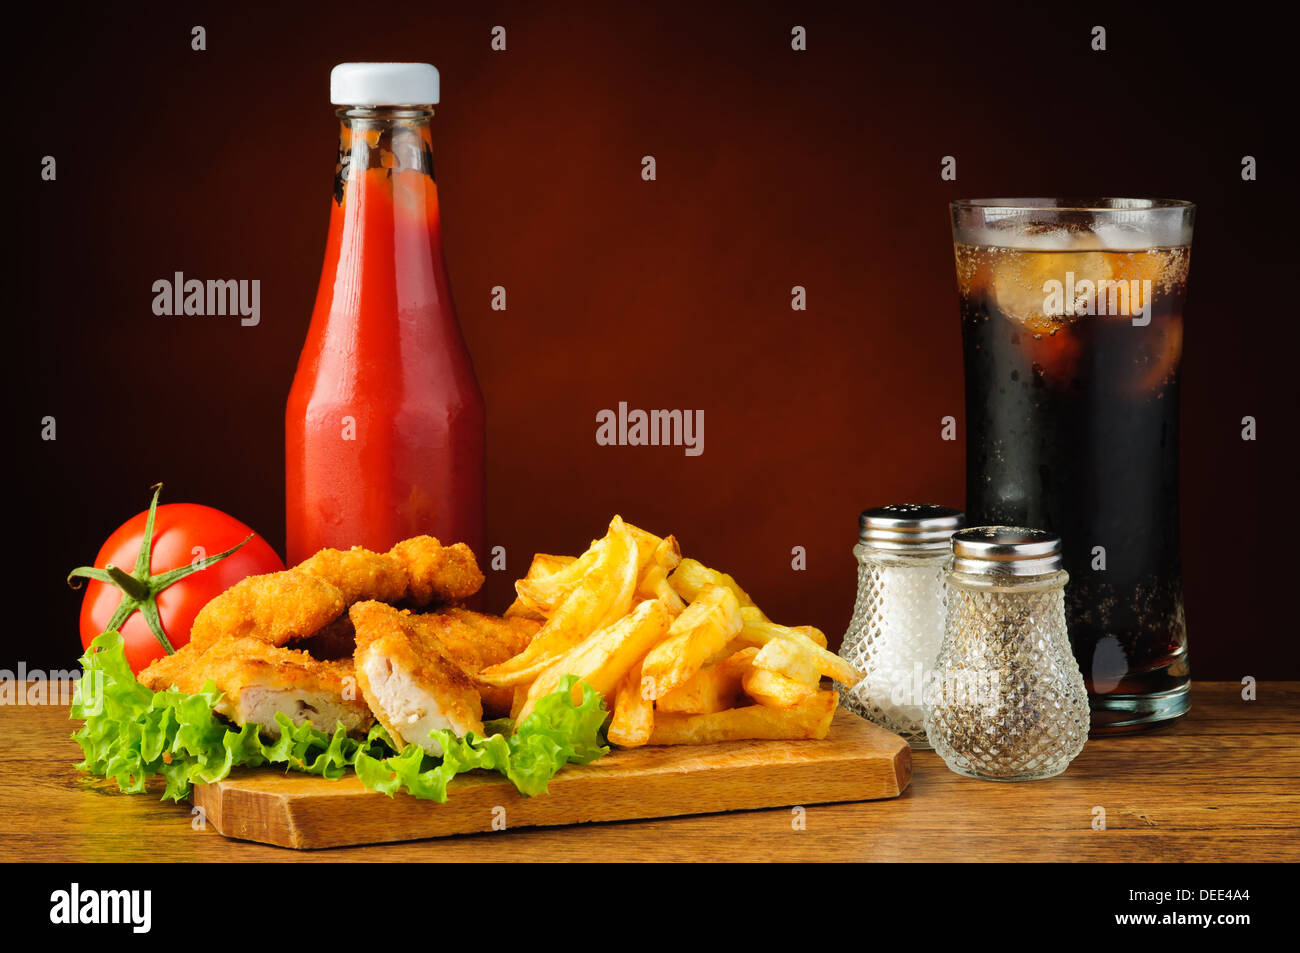 still life with fast food menu, chicken nuggets, french fries, cola and tomato ketchup Stock Photo